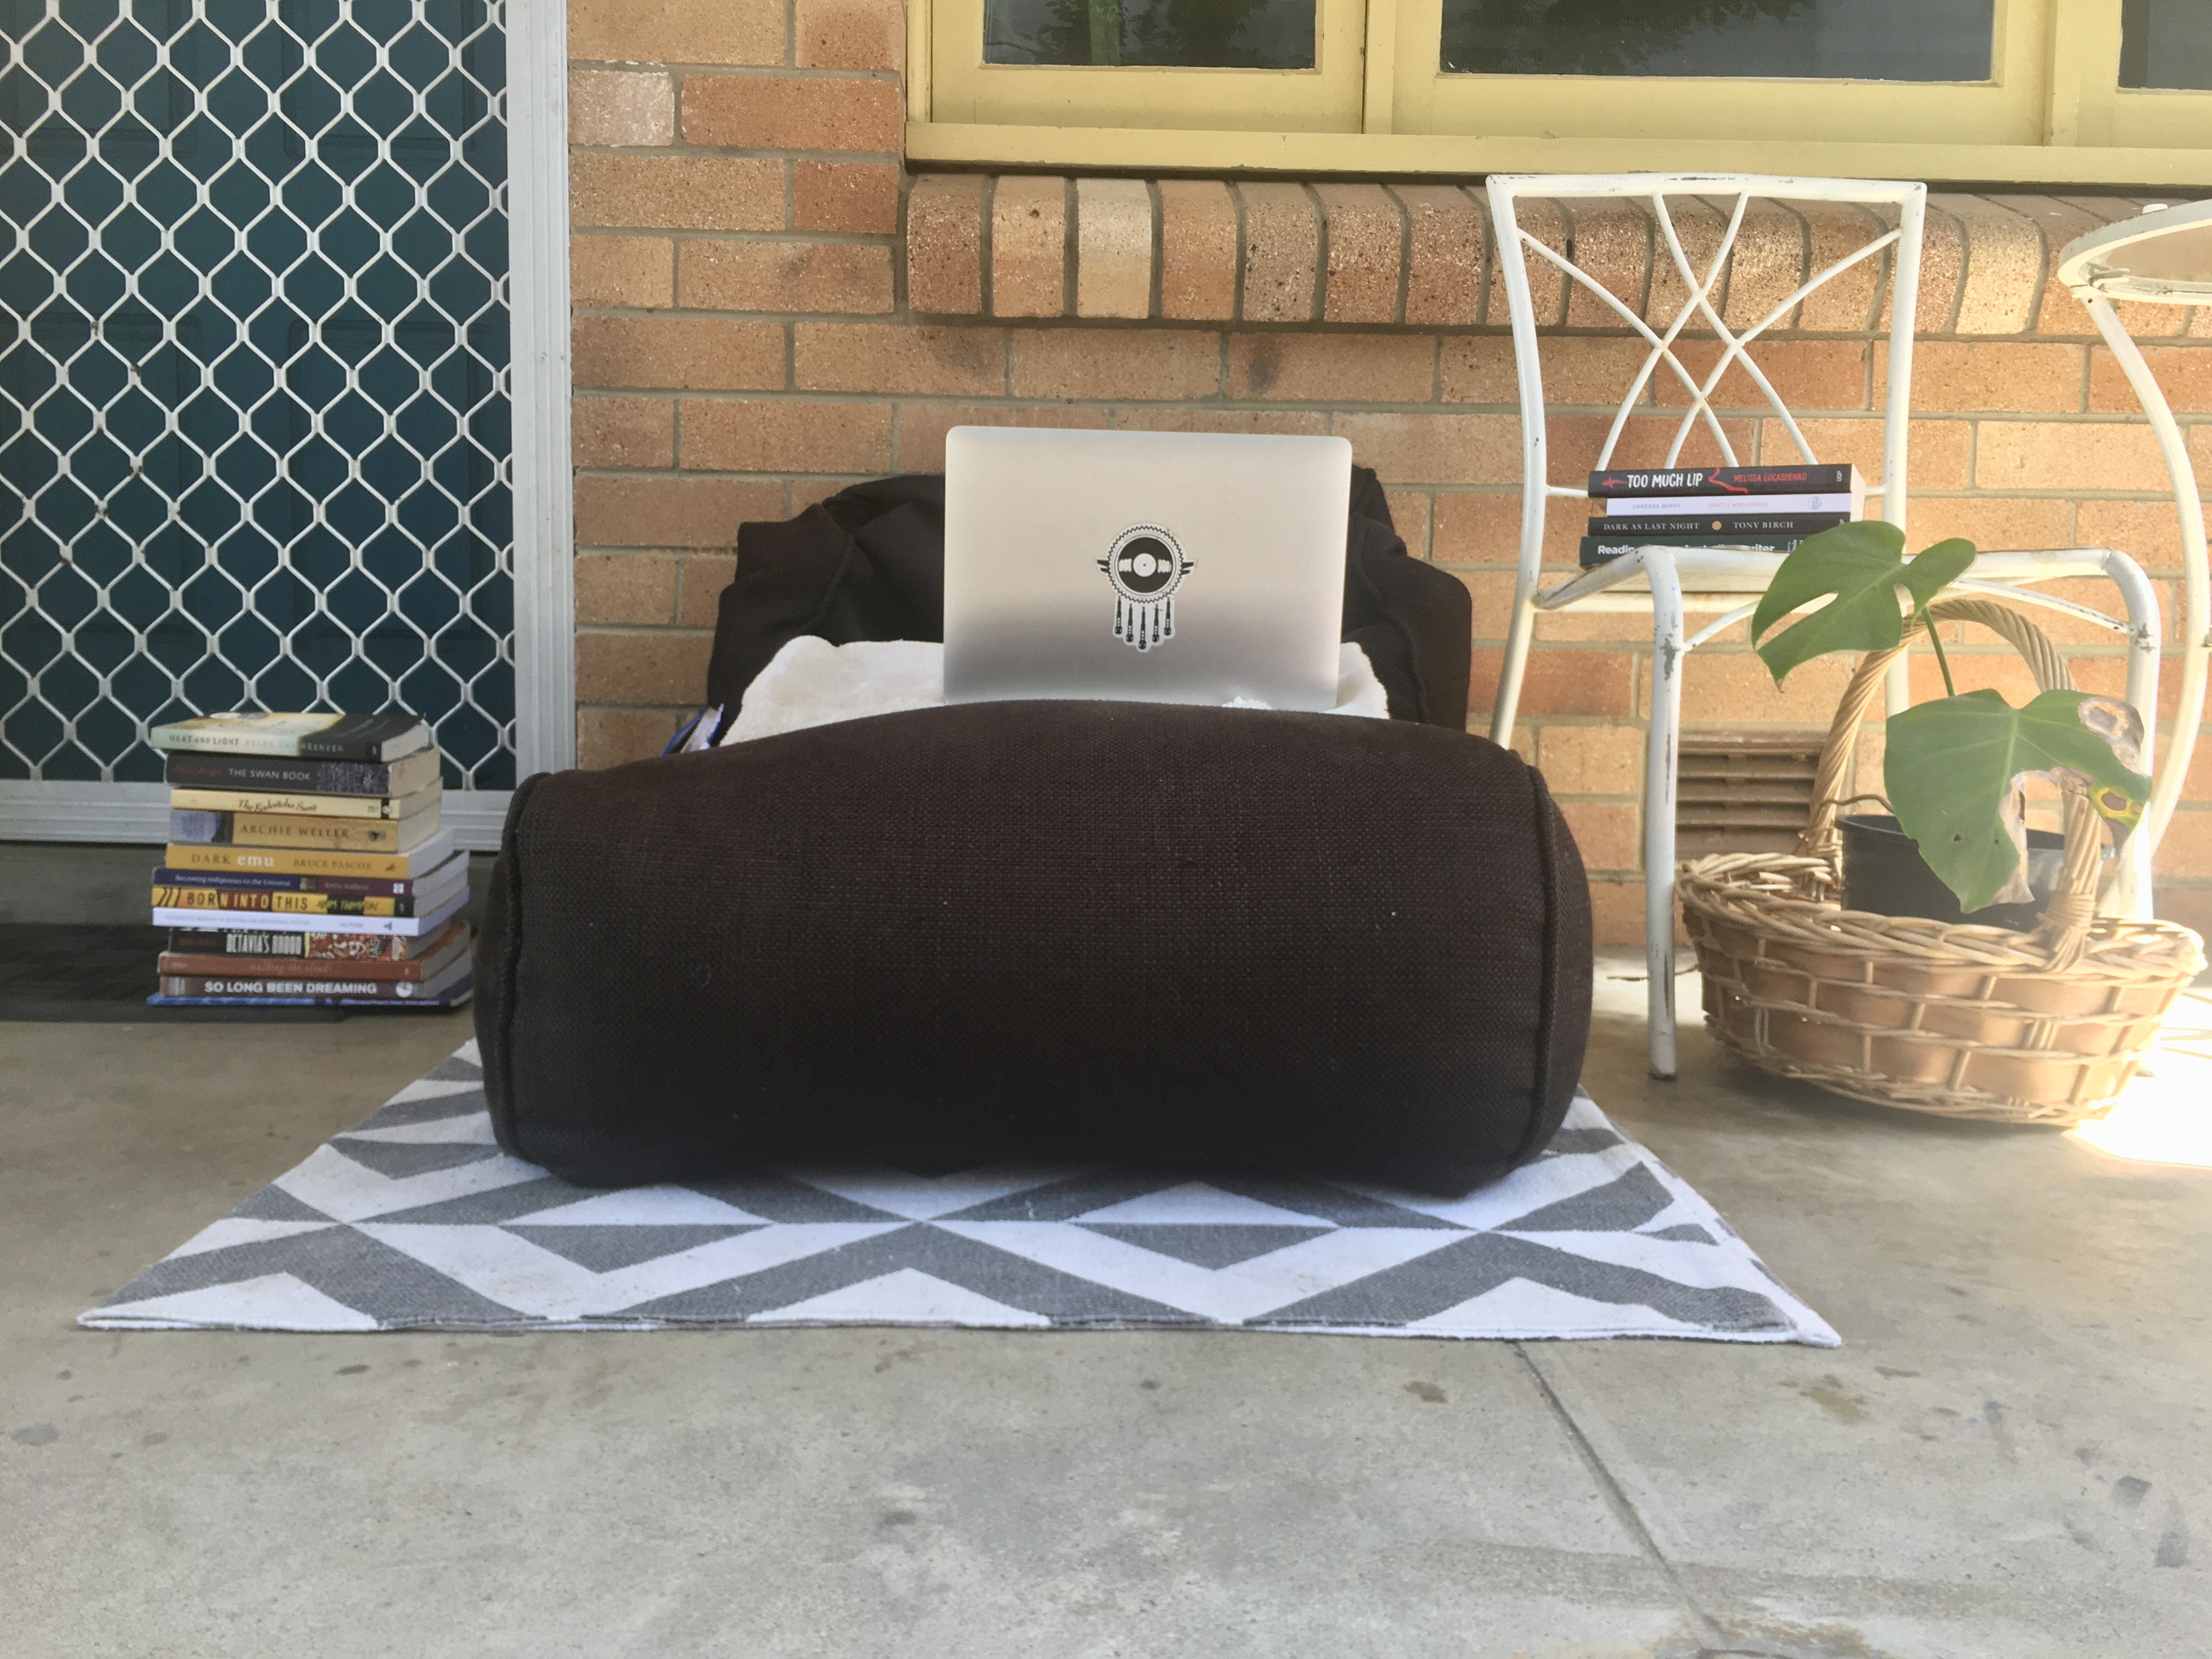 Mykaela's laptop is propped up on a black beanbag outside. Next to this are chairs with stacks of books and a pot plant.